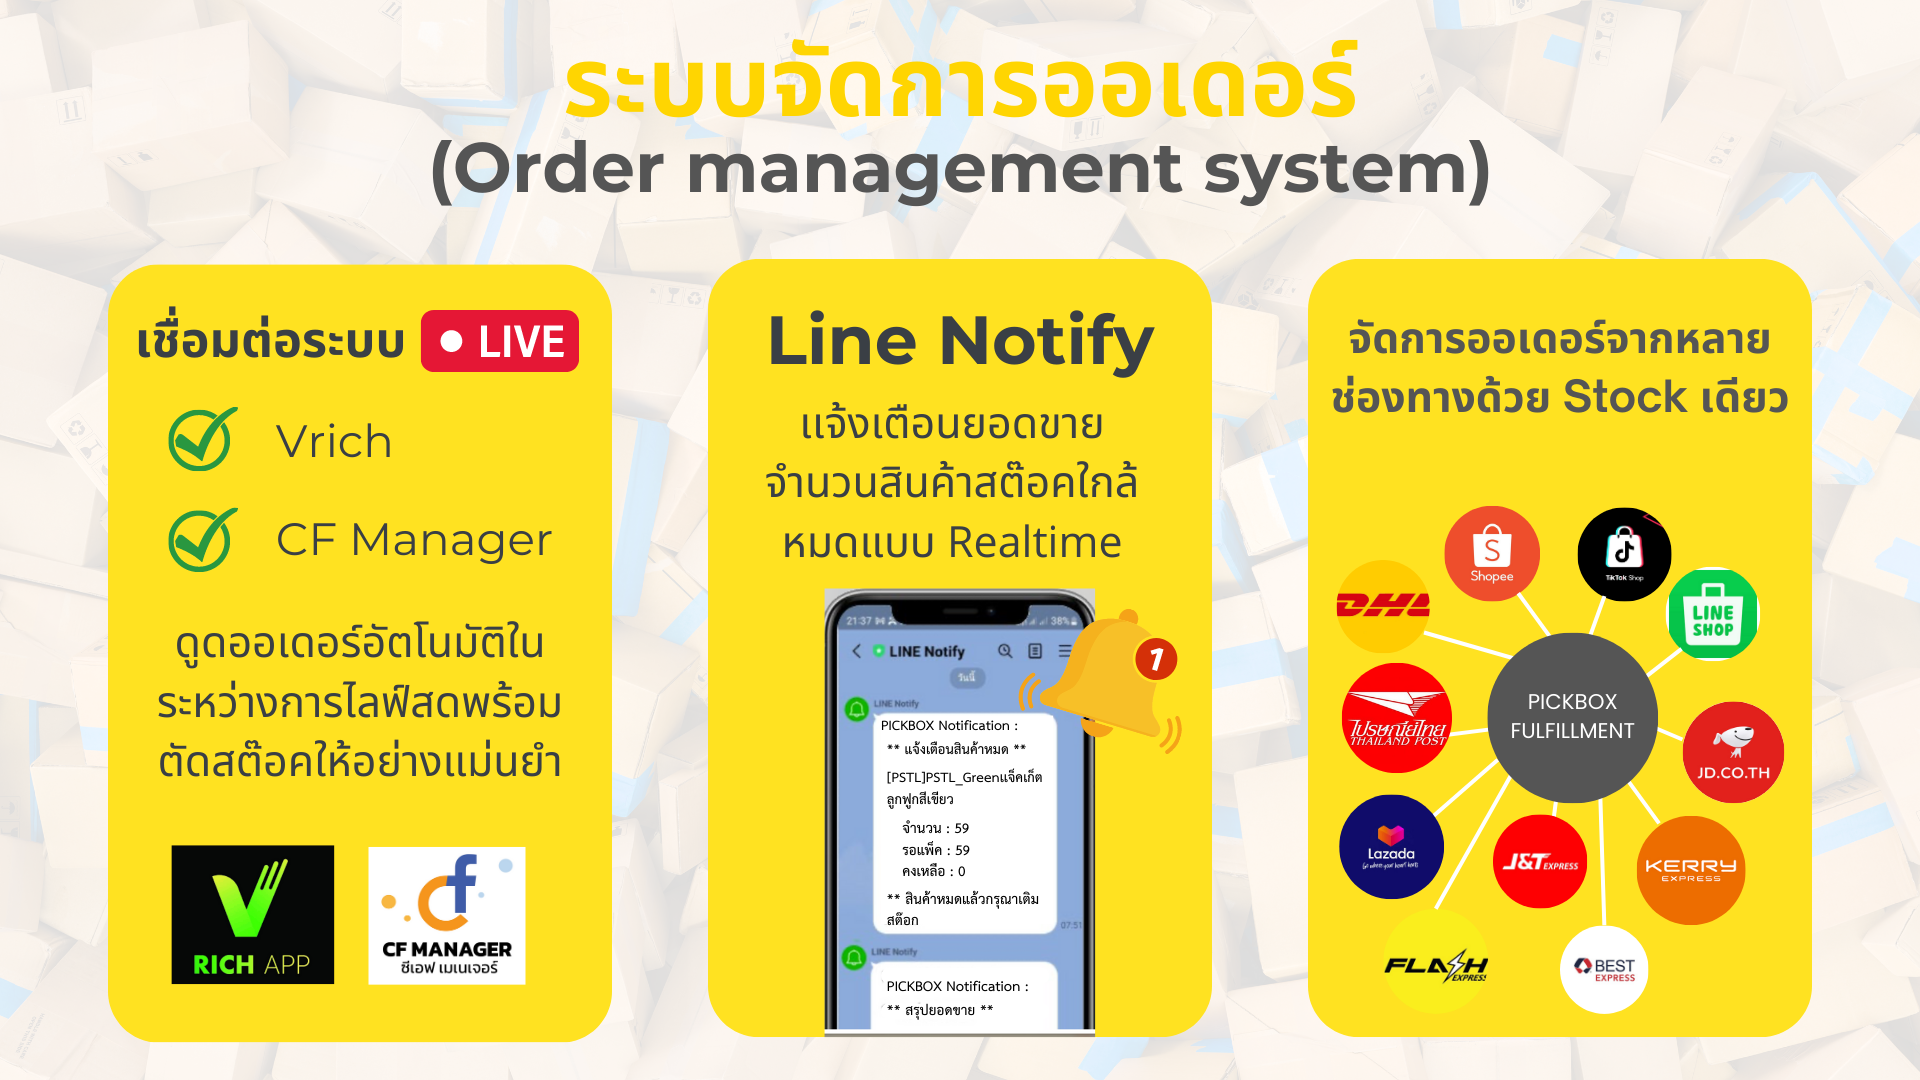 what is Order management system?